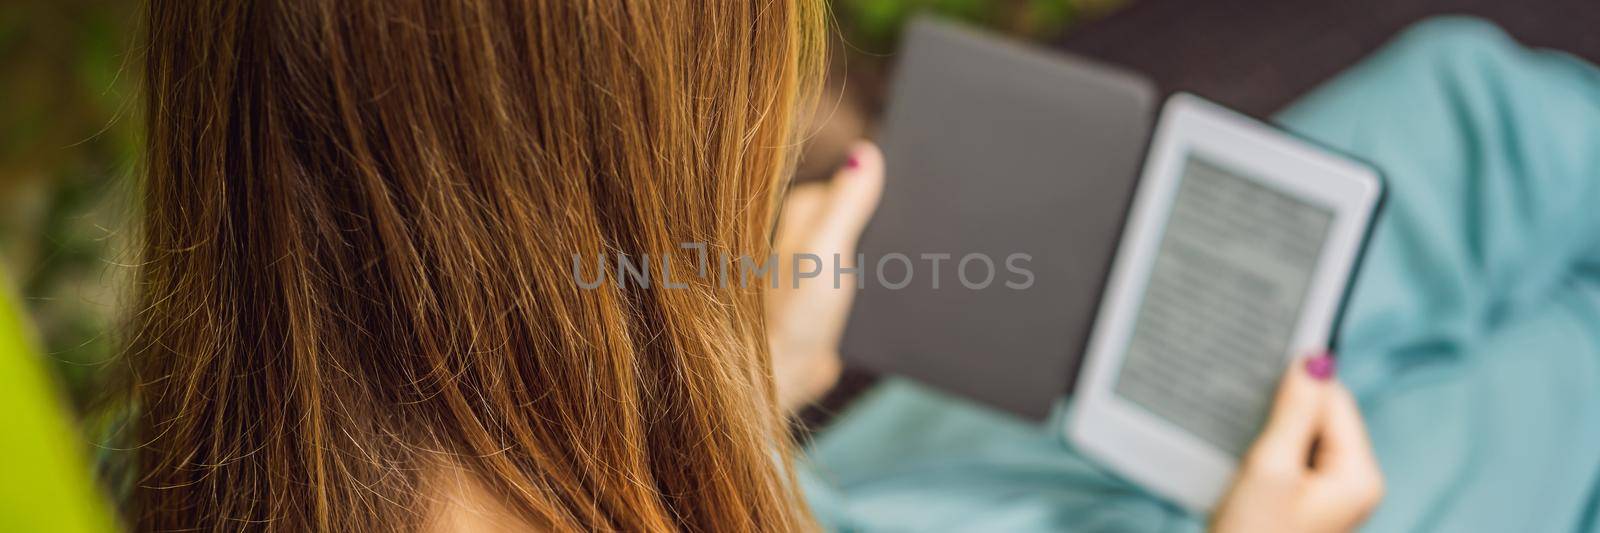 Woman reads e-book on deck chair in the garden. BANNER, LONG FORMAT